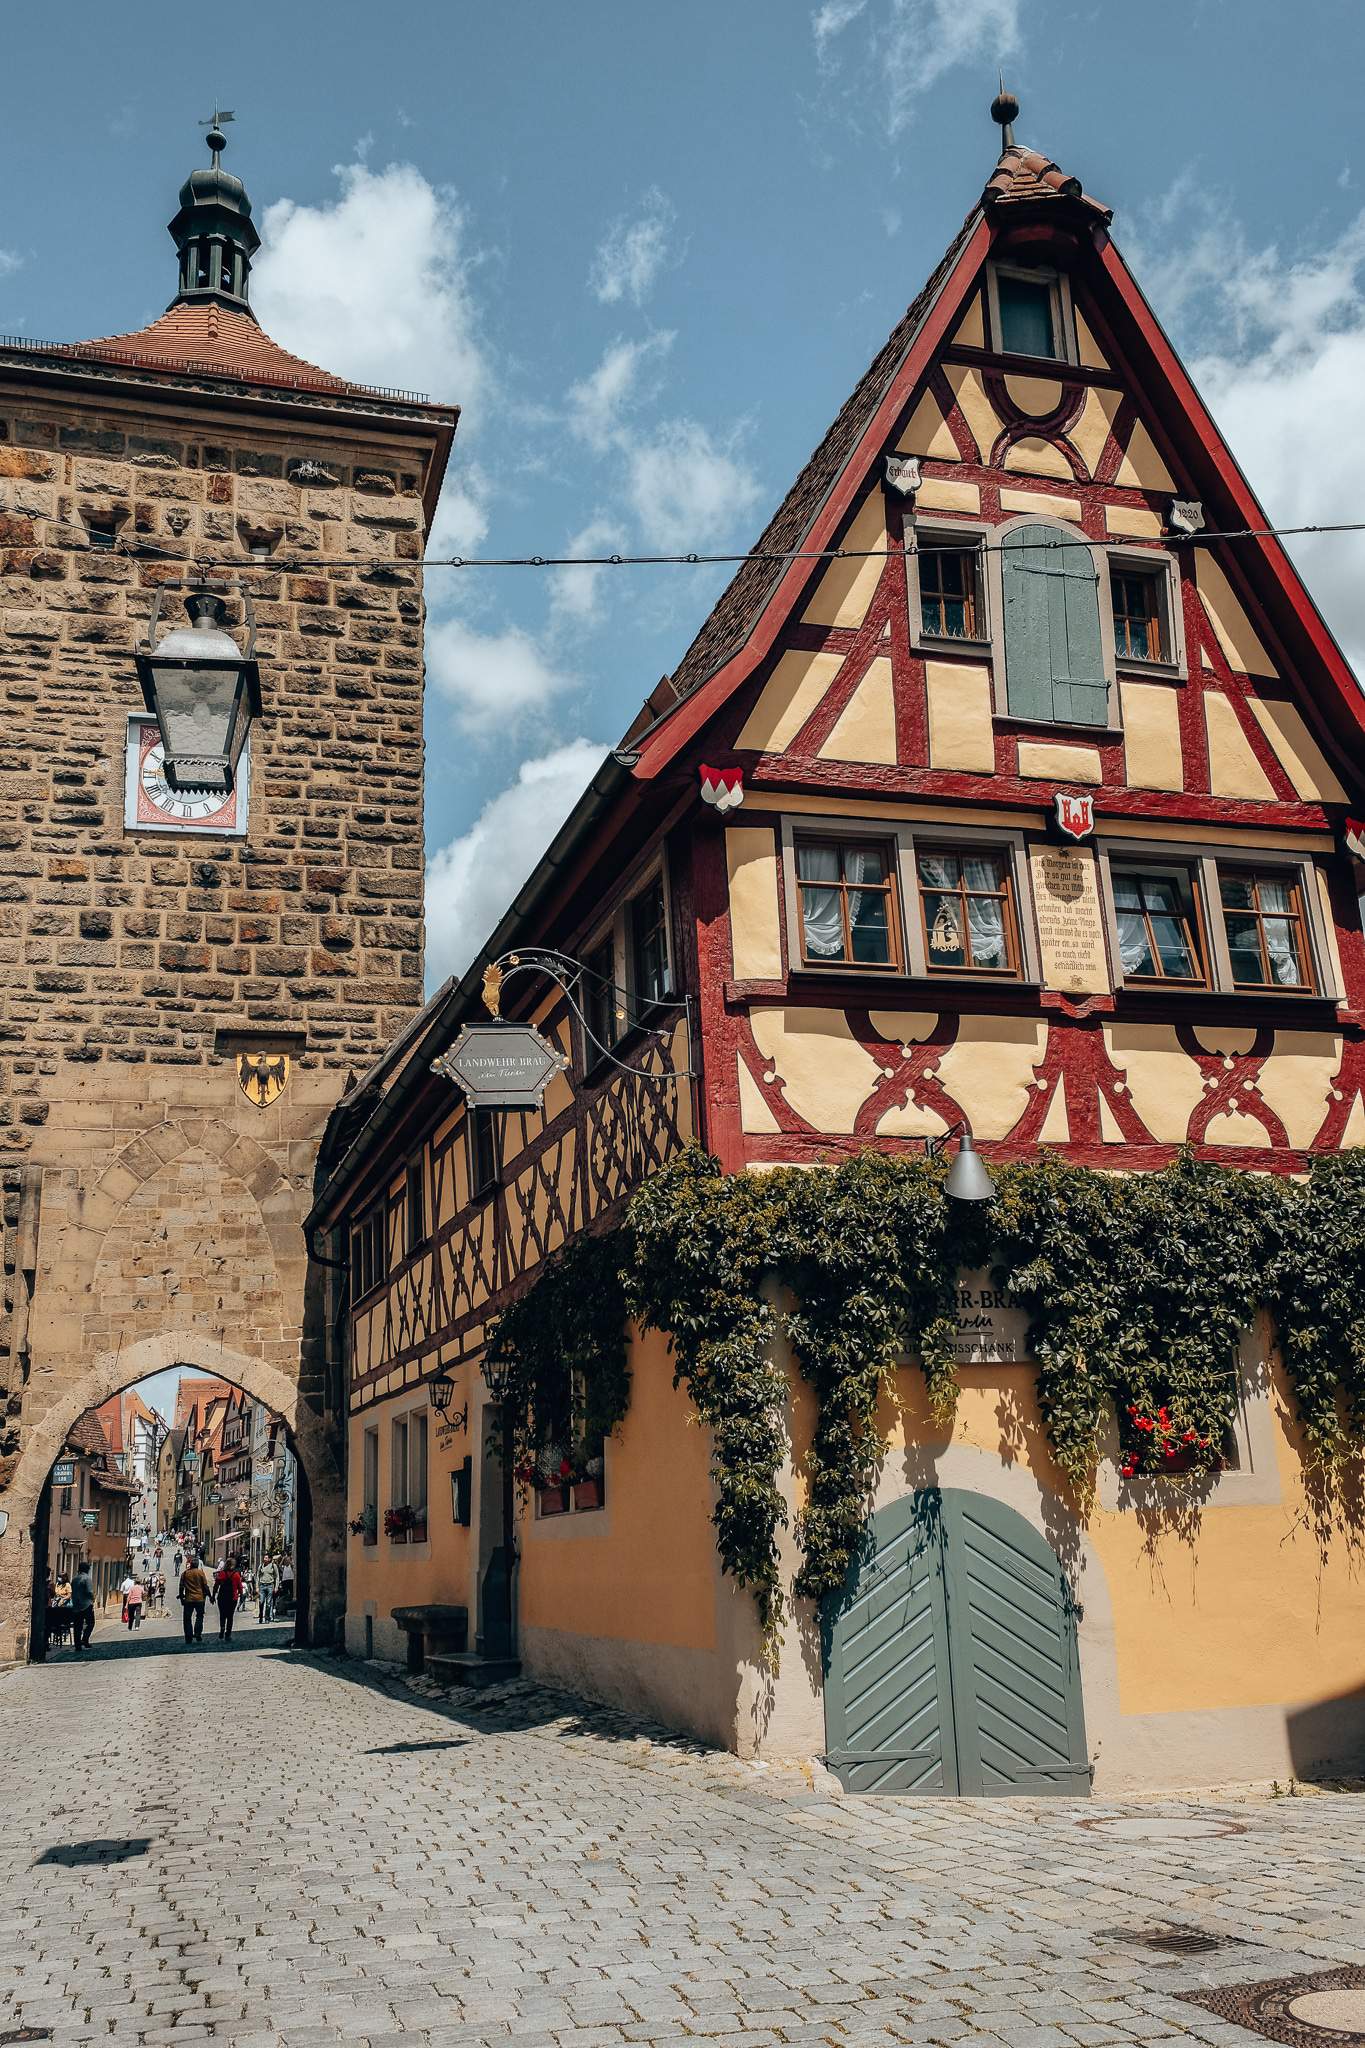 One of the best Hotels in Rothenburg ob der Tauber